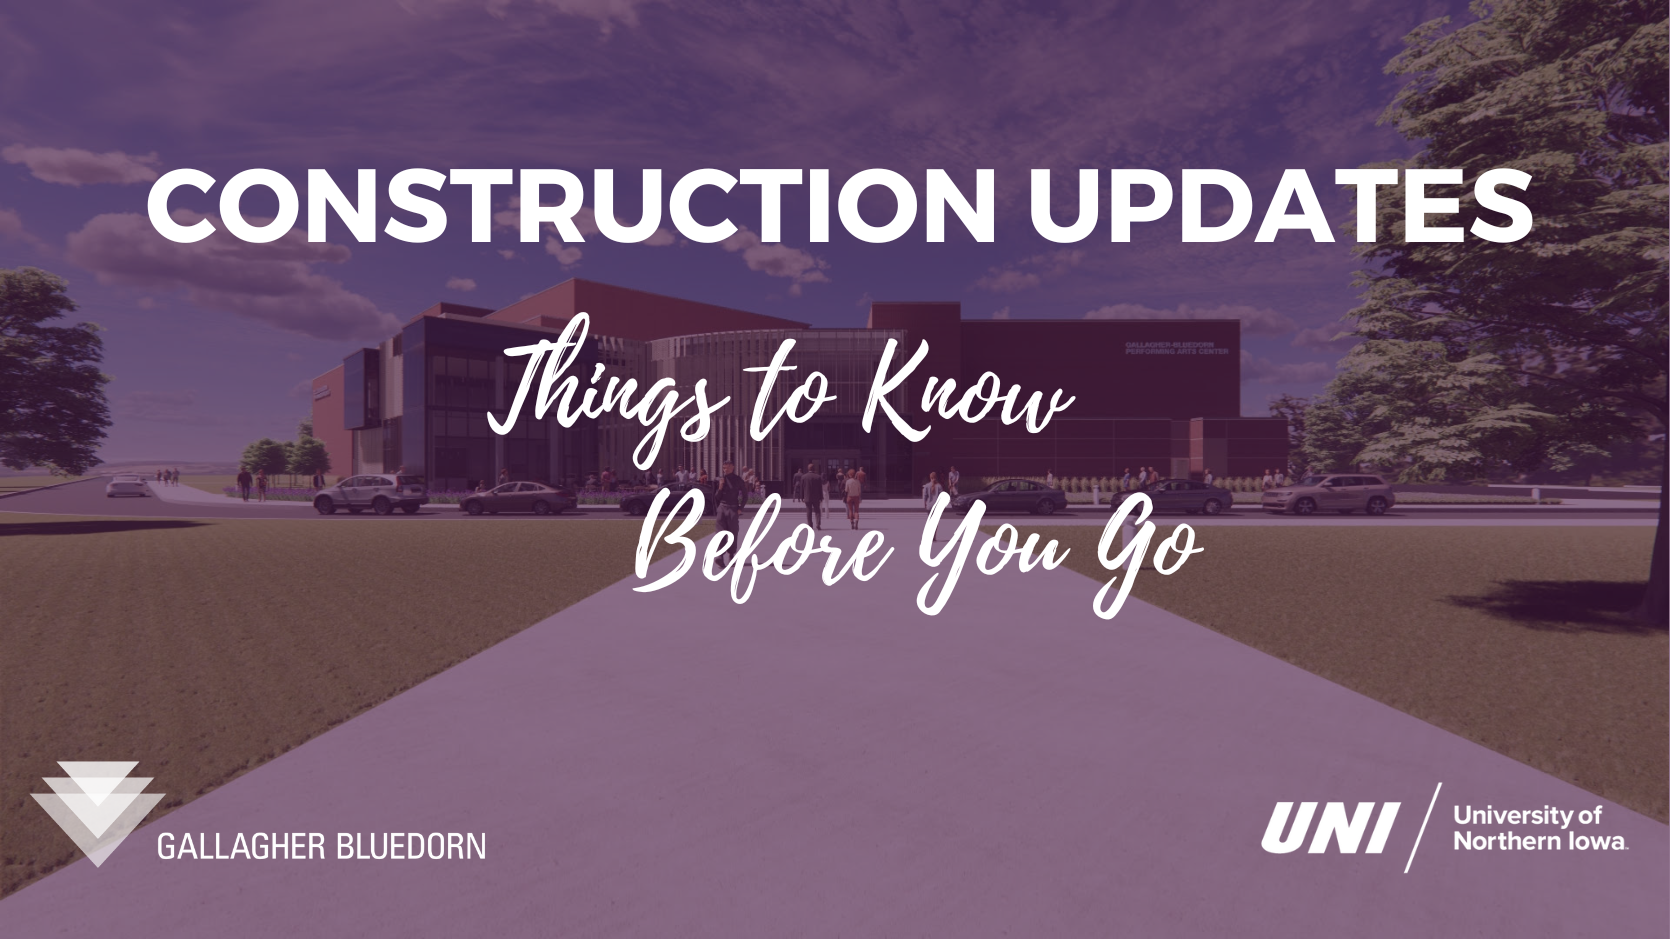 Construction Updates: Things to Know Before You Go